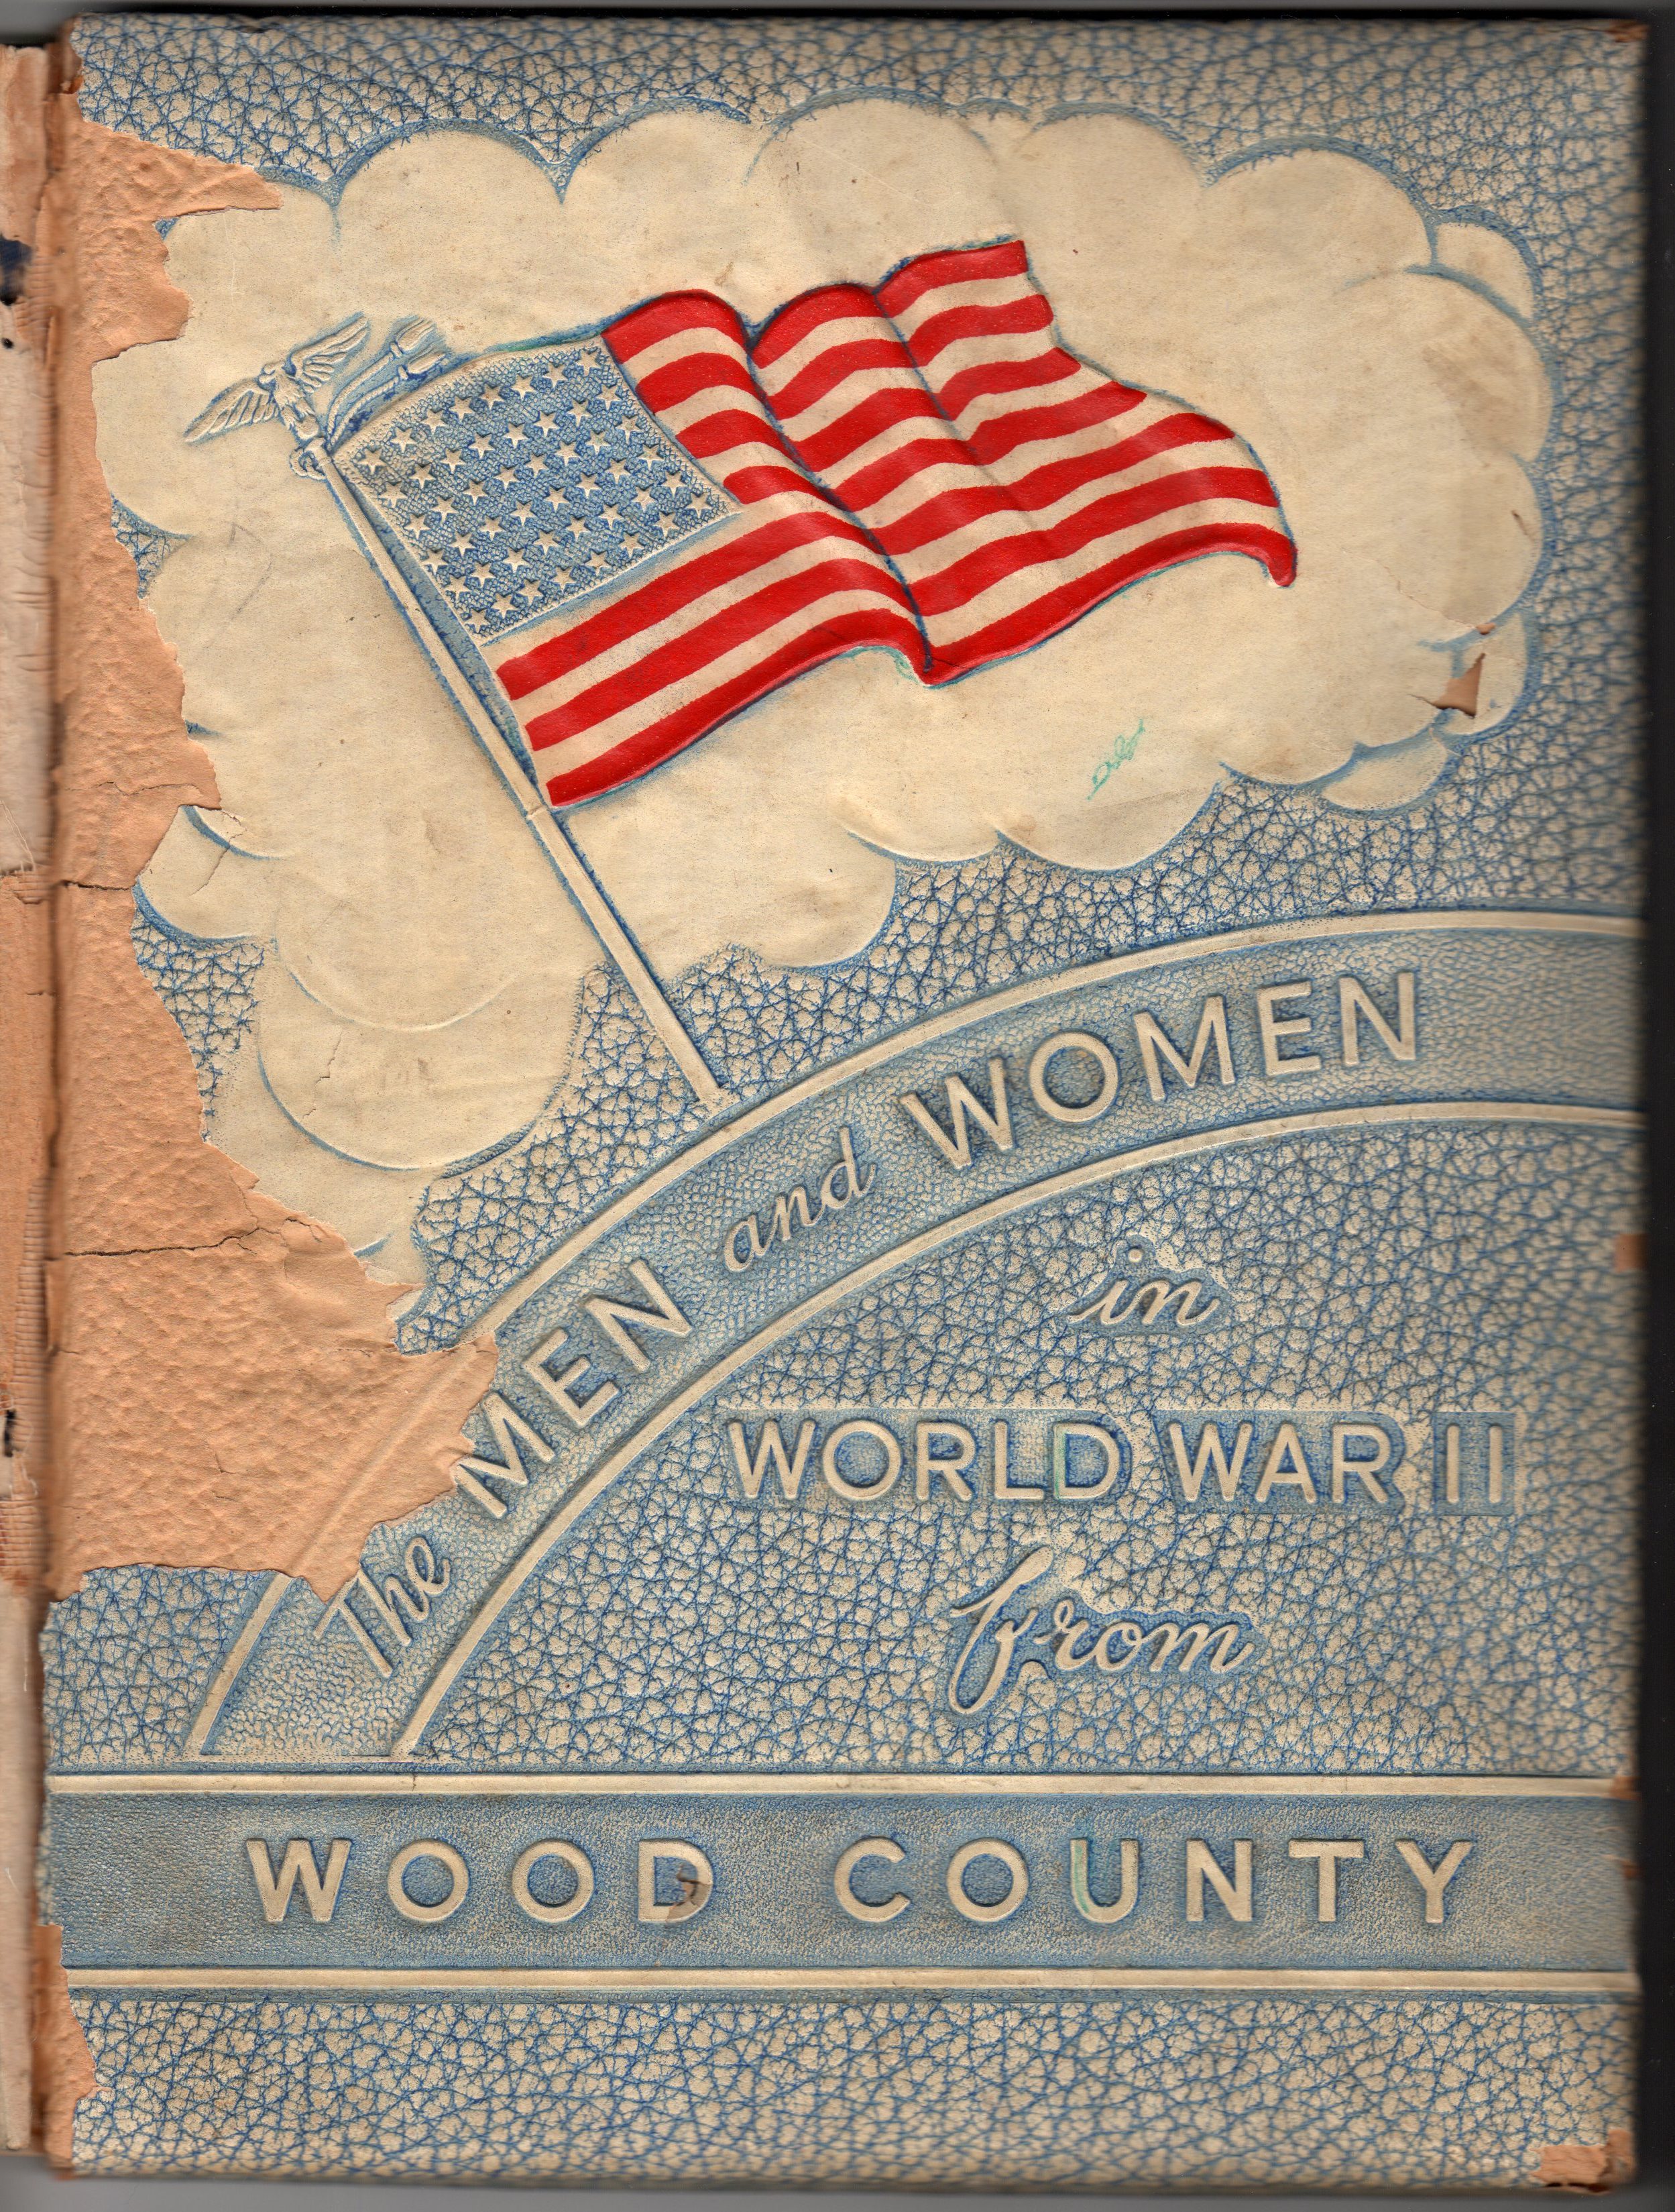 Men and women in the Armed Forces from Woods County Texas